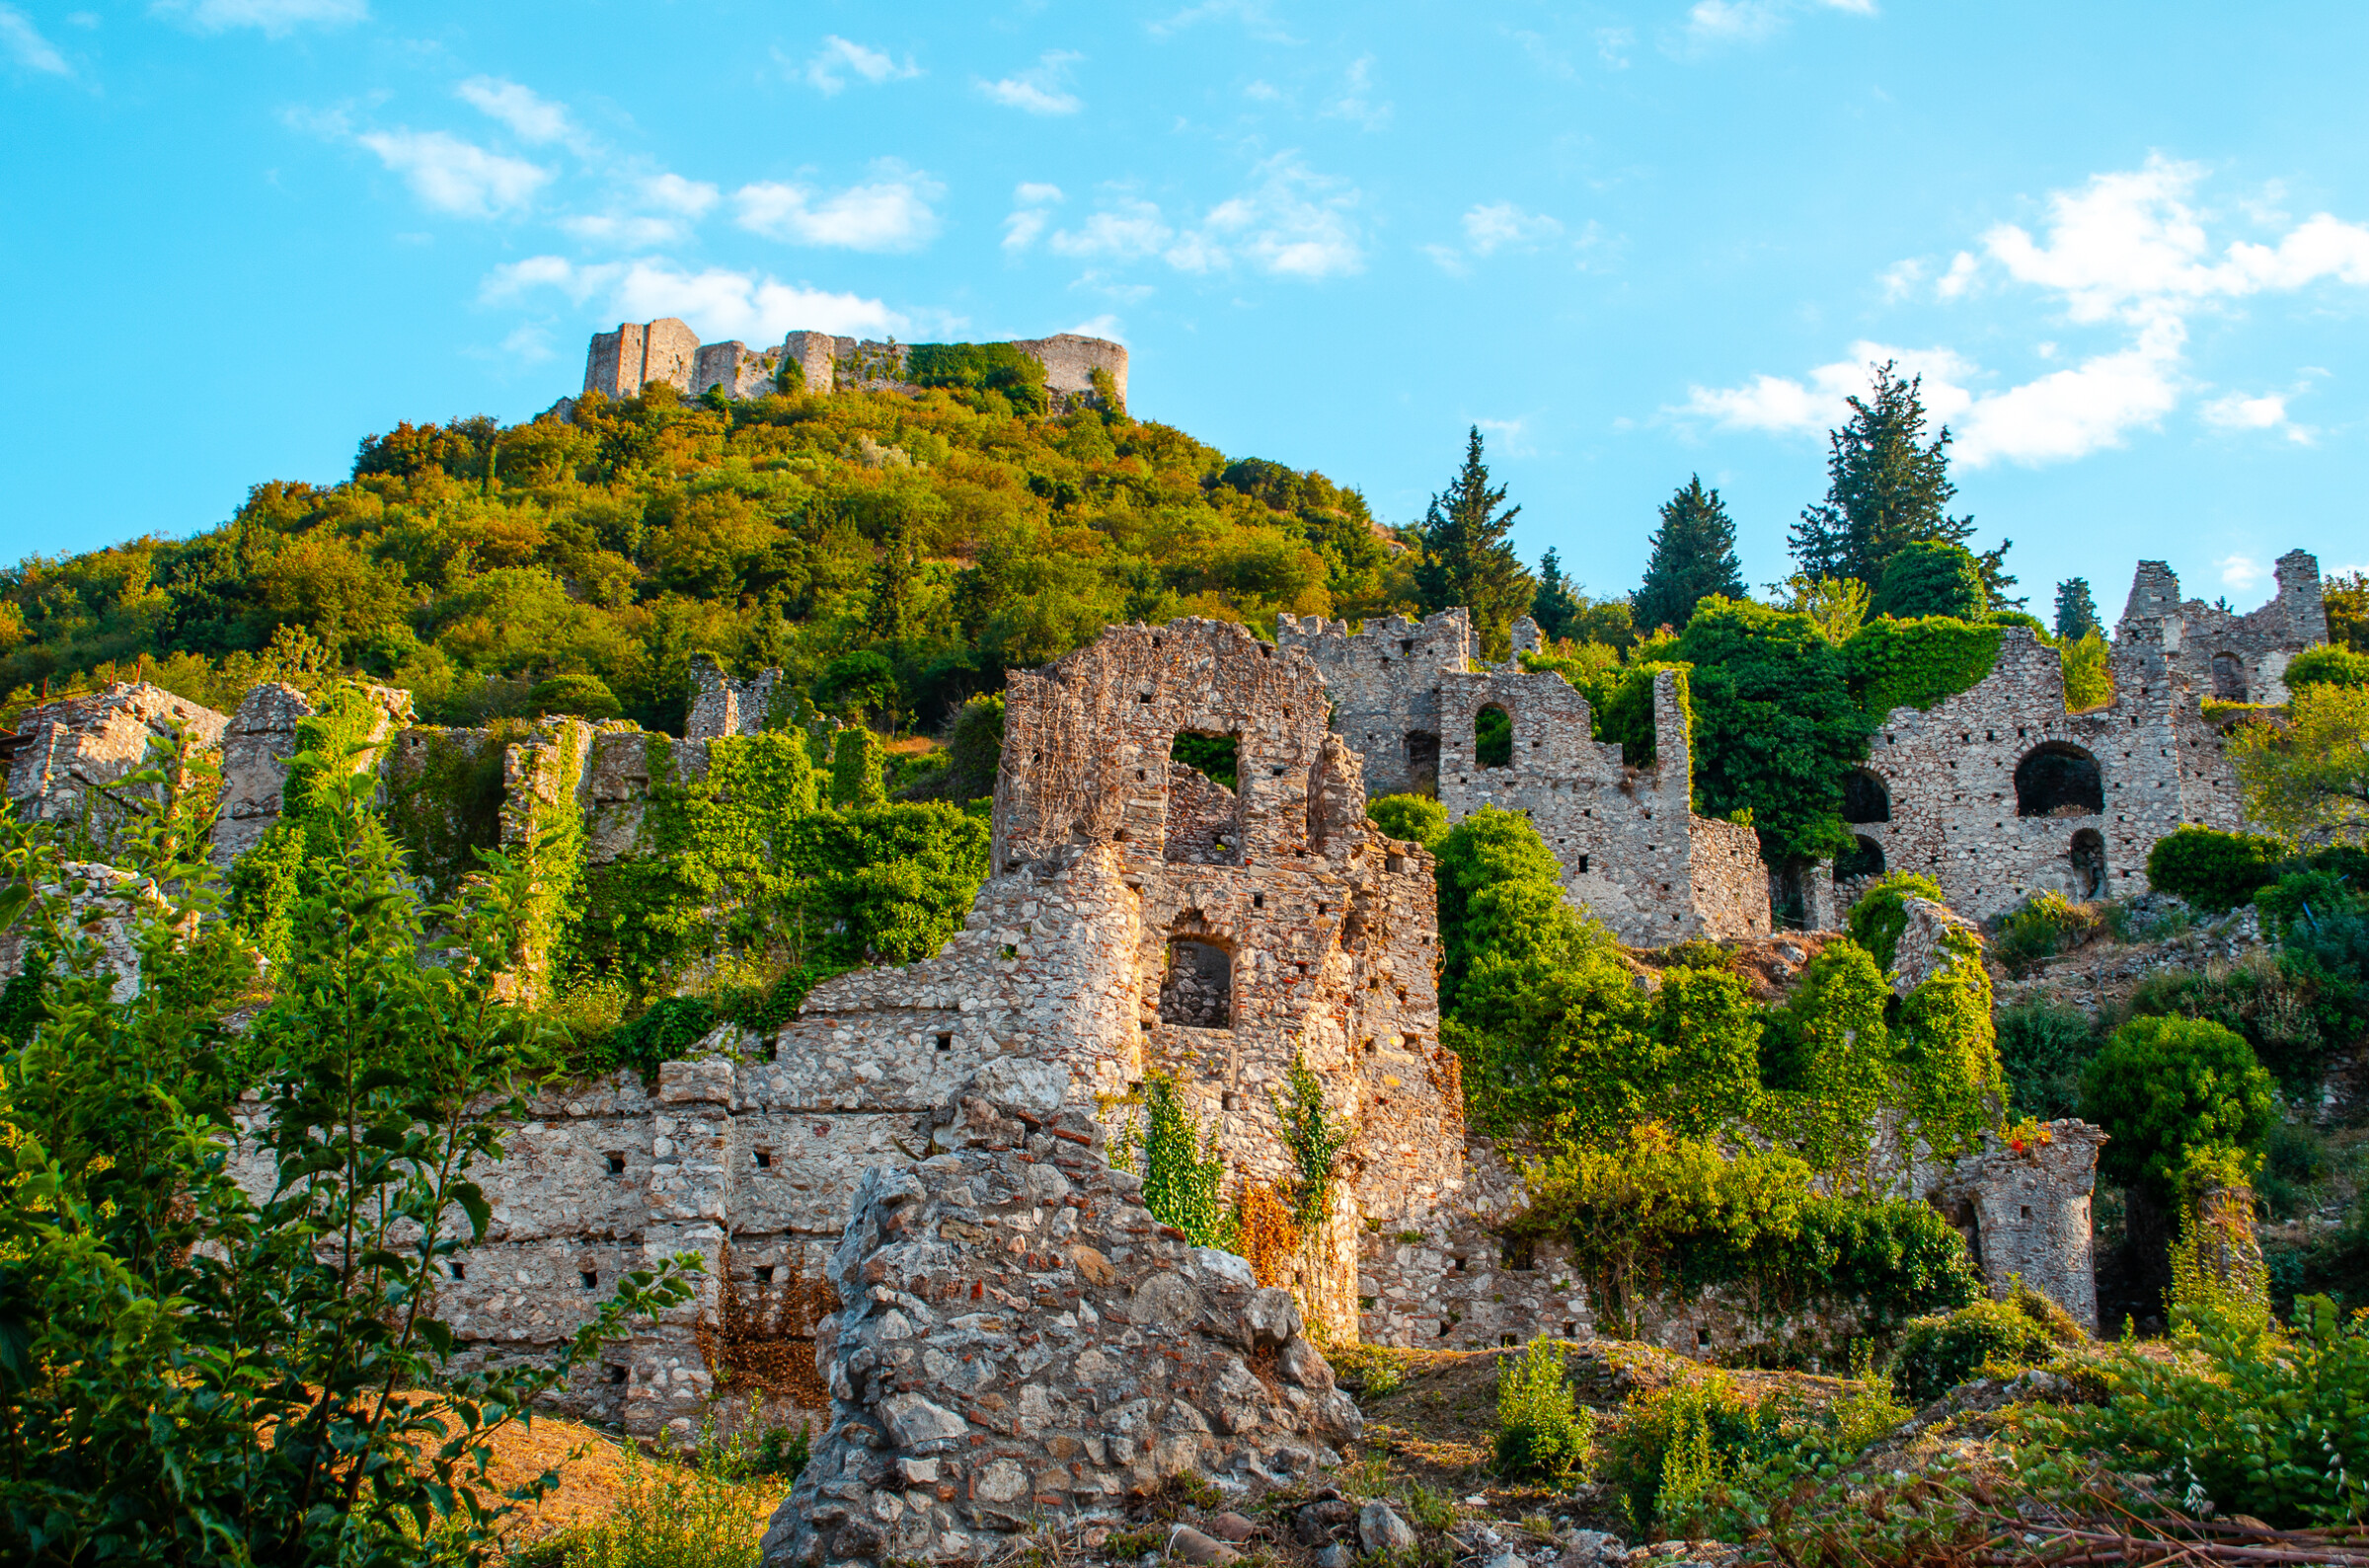 This image shows the medieval ruins of the castle town of Mystras amidst lush greenery. 